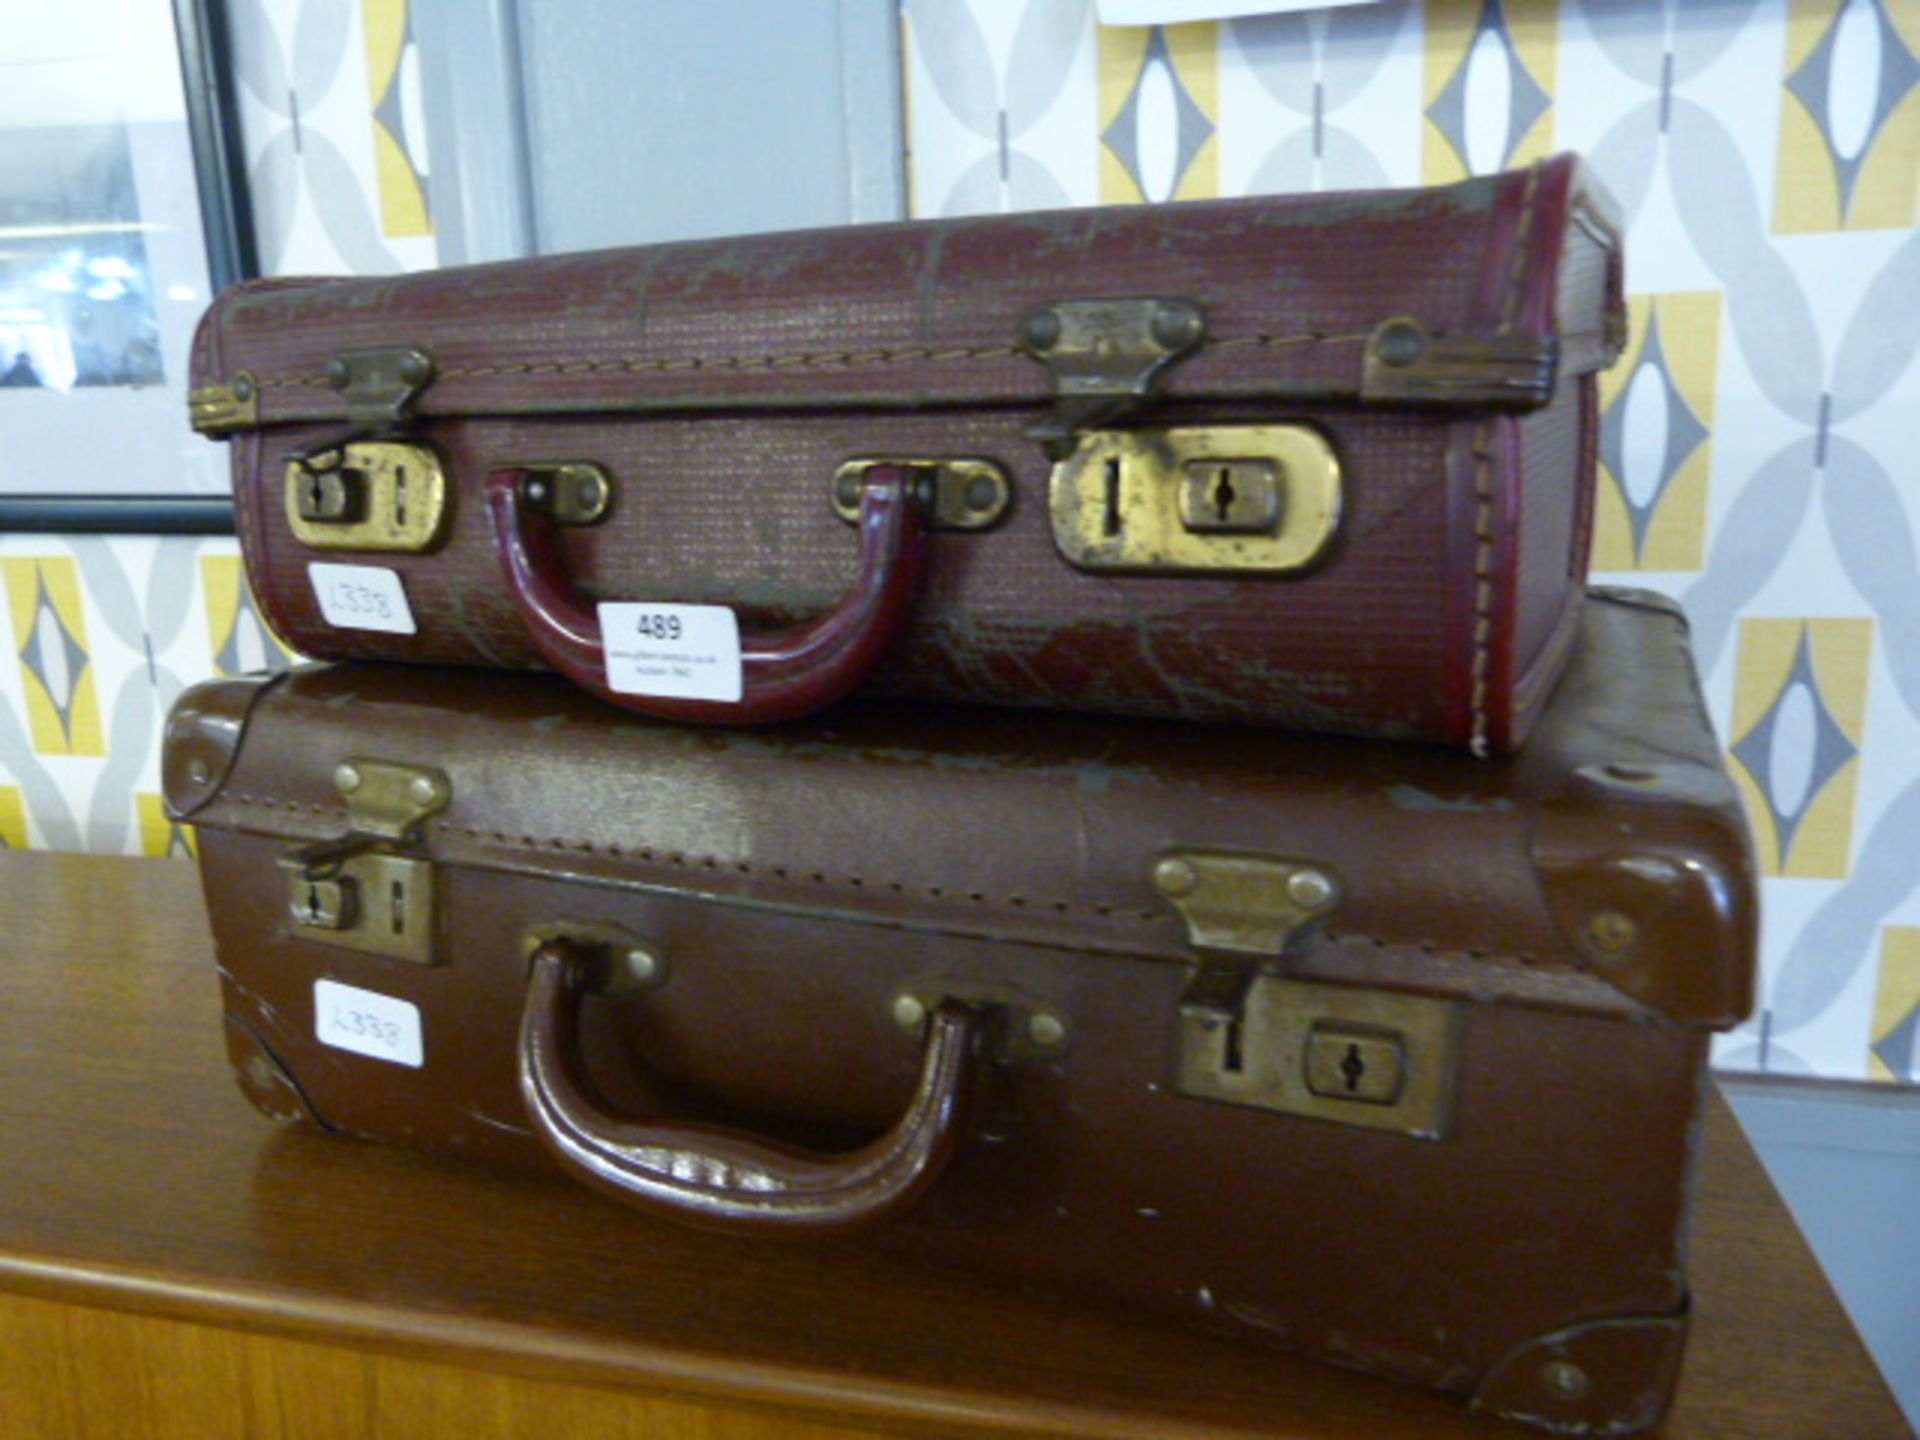 Two Small Cardboard Suitcases